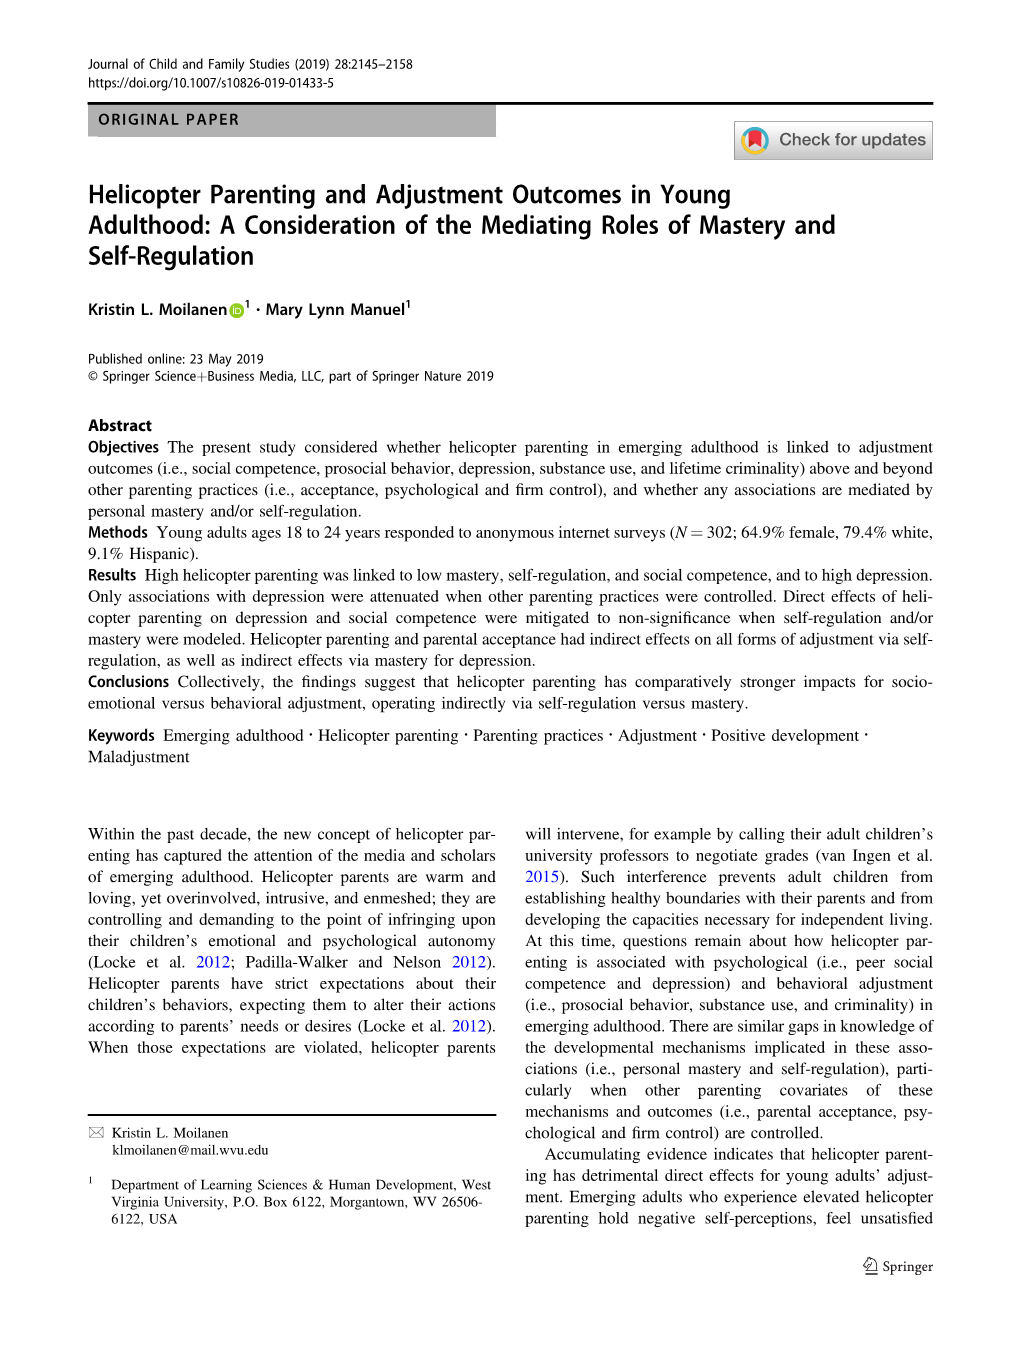 Helicopter Parenting and Adjustment Outcomes in Young Adulthood: a Consideration of the Mediating Roles of Mastery and Self-Regulation